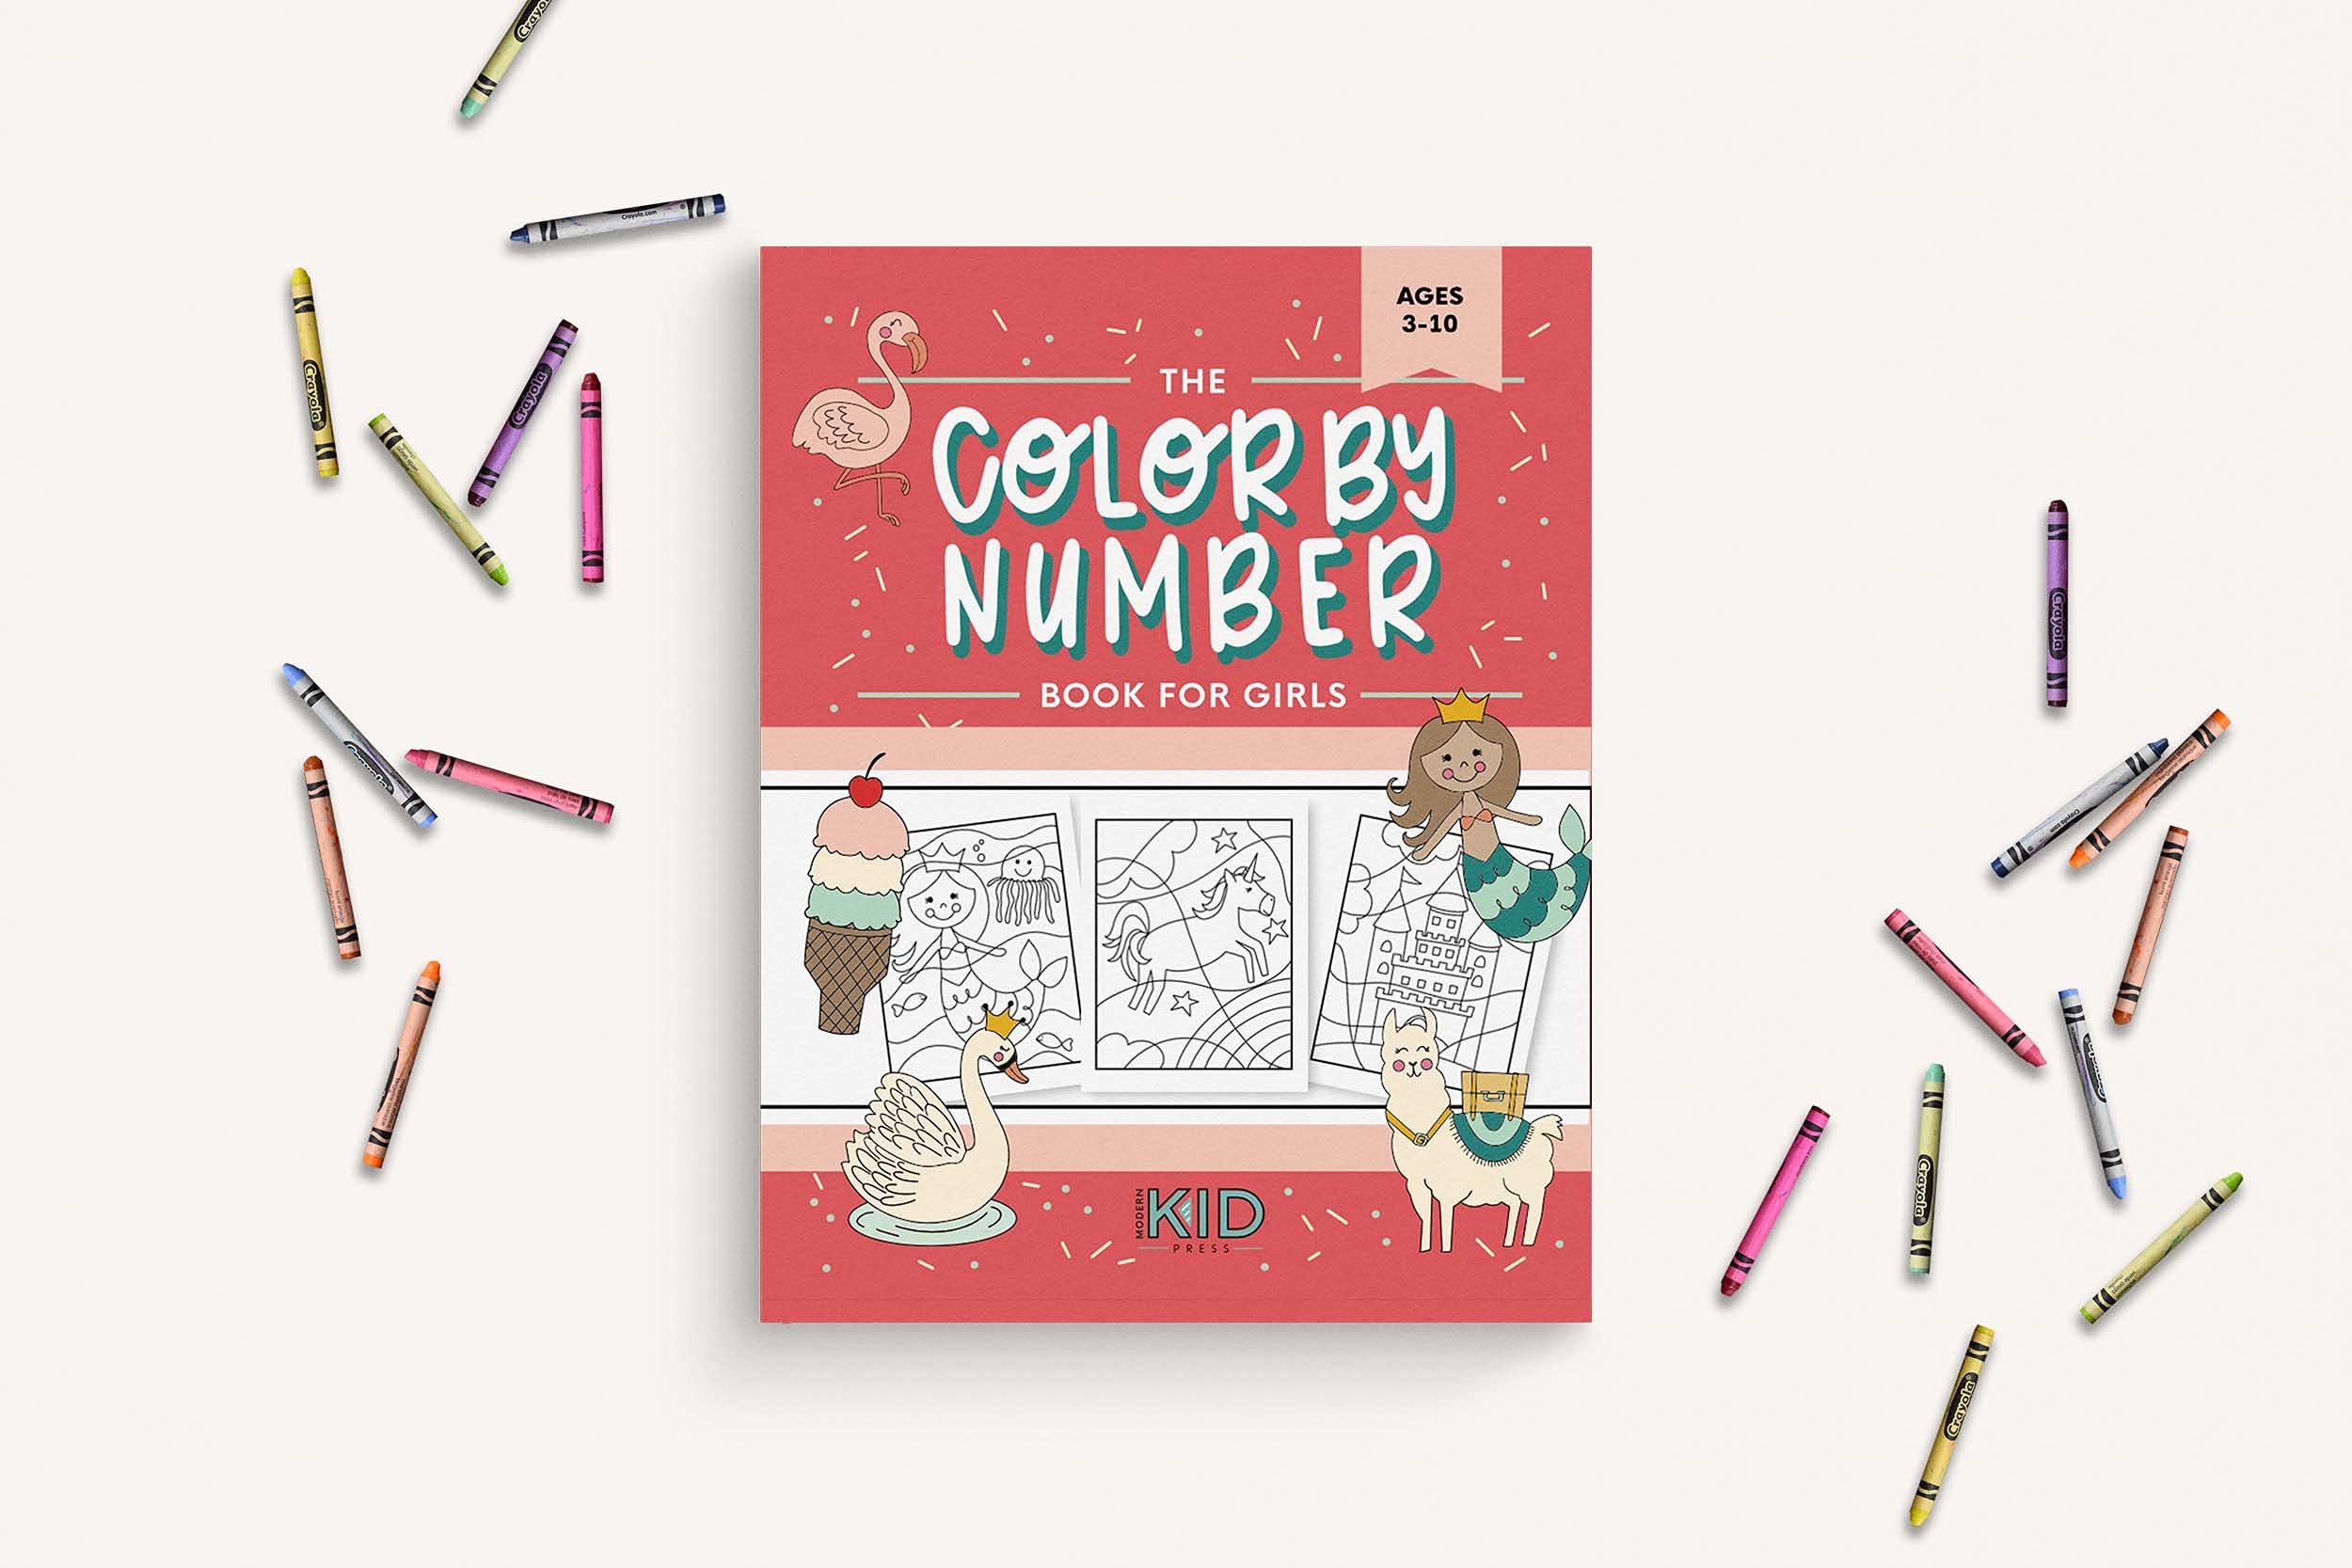 The Color by Number Book for Girls on desk